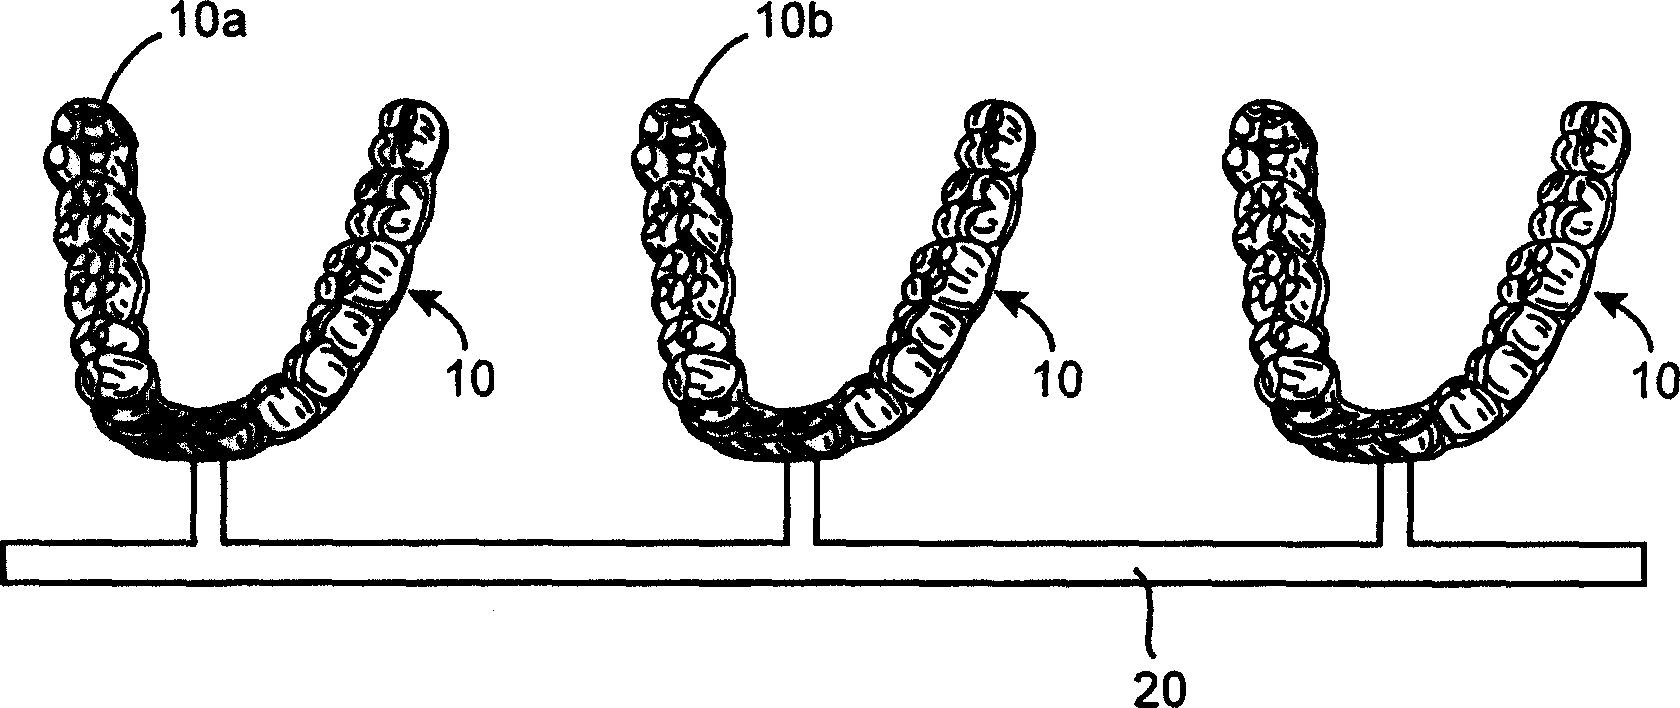 Dental appliance sequence ordering system and method